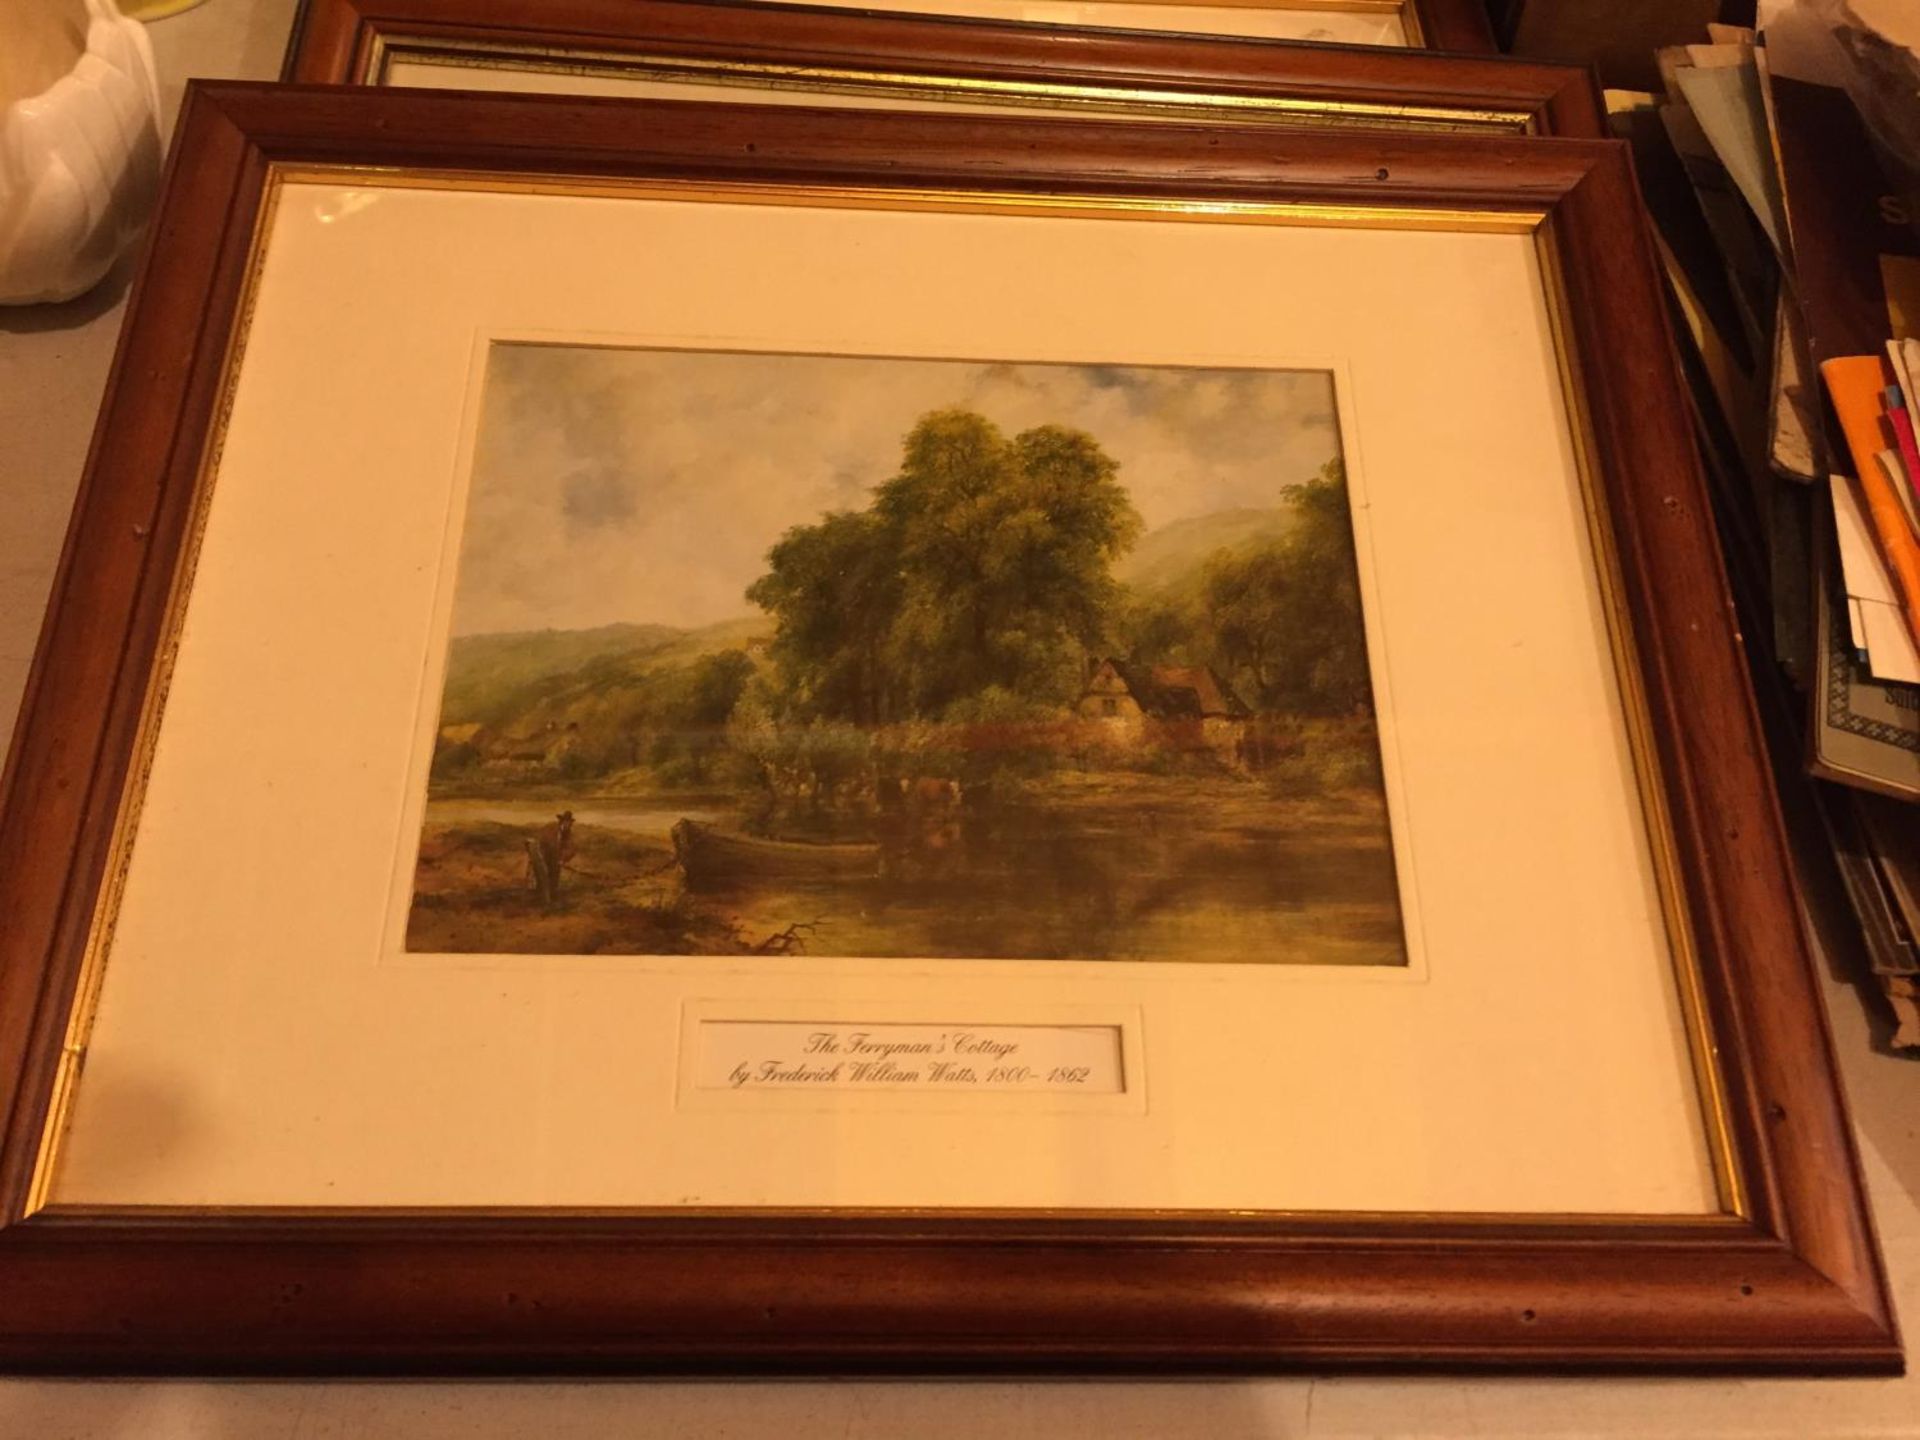 FOUR FRAMED PICTURES, TWO BY FREDERICK WILLIAM WATTS AND TWO BY JOSEPH FARQUHARSON, DEPICTING - Image 2 of 5